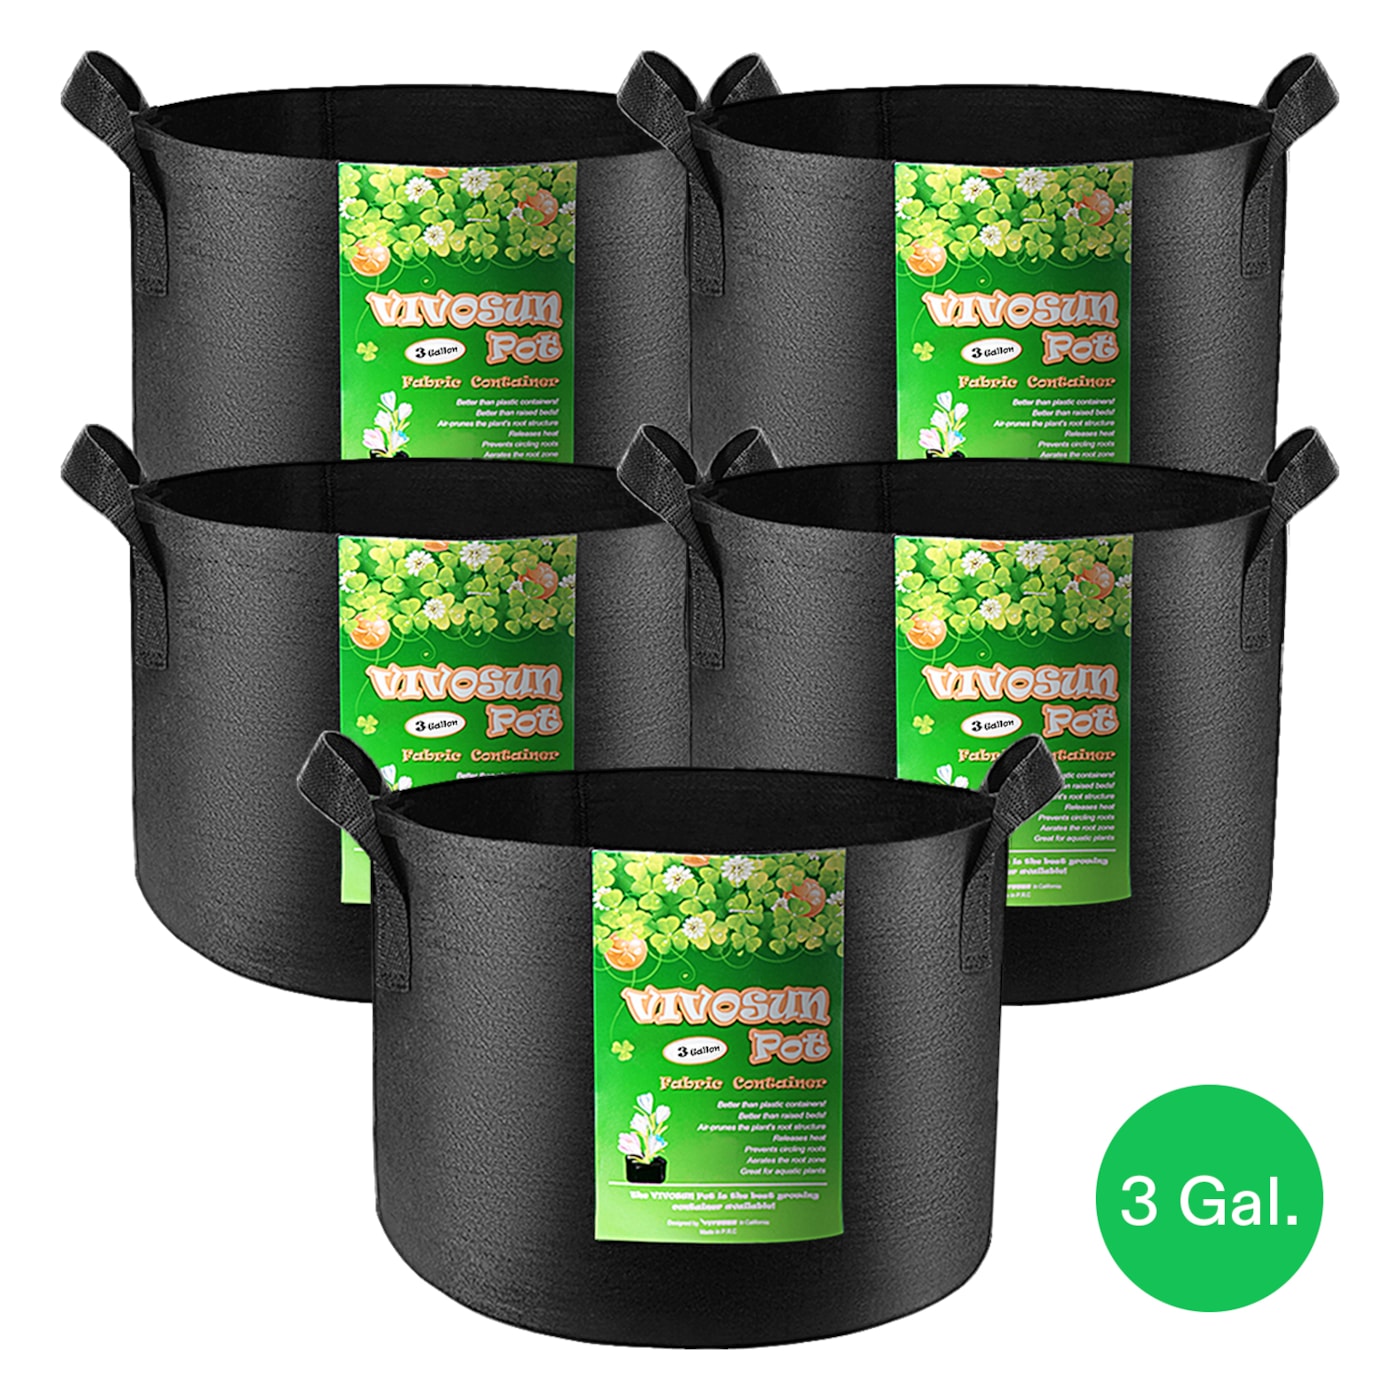 VIVOSUN 3 Gallon Grow Bags 5-Pack Black Thickened Nonwoven Fabric Pots with Handles